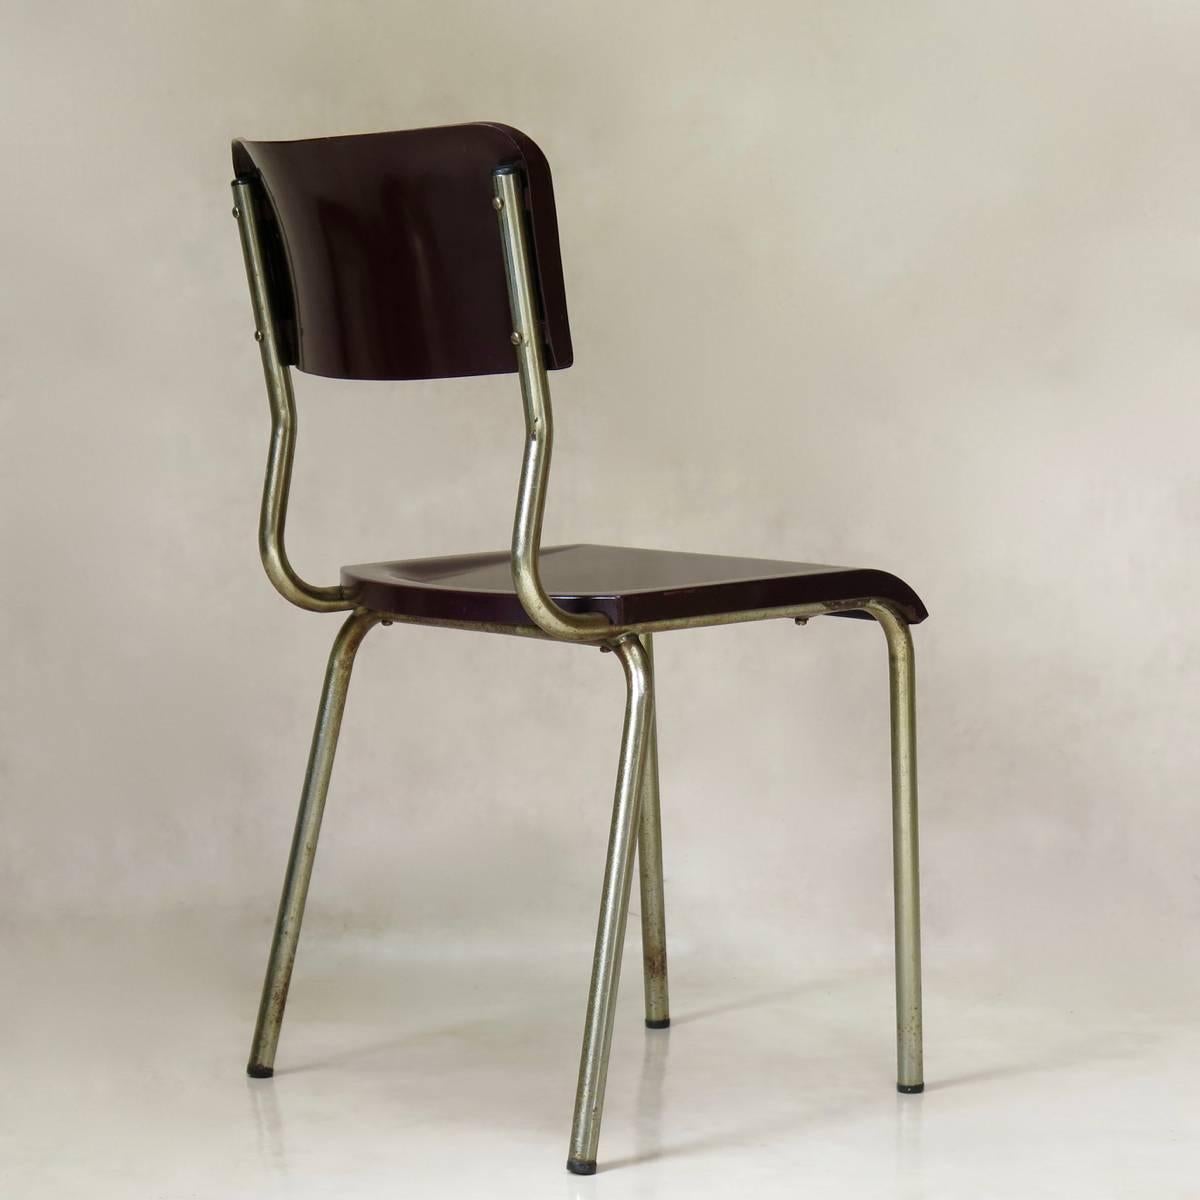 Mid-Century Modern Rene Herbst Bakelite and Chrome Chairs '12 Available', France, 1950s For Sale